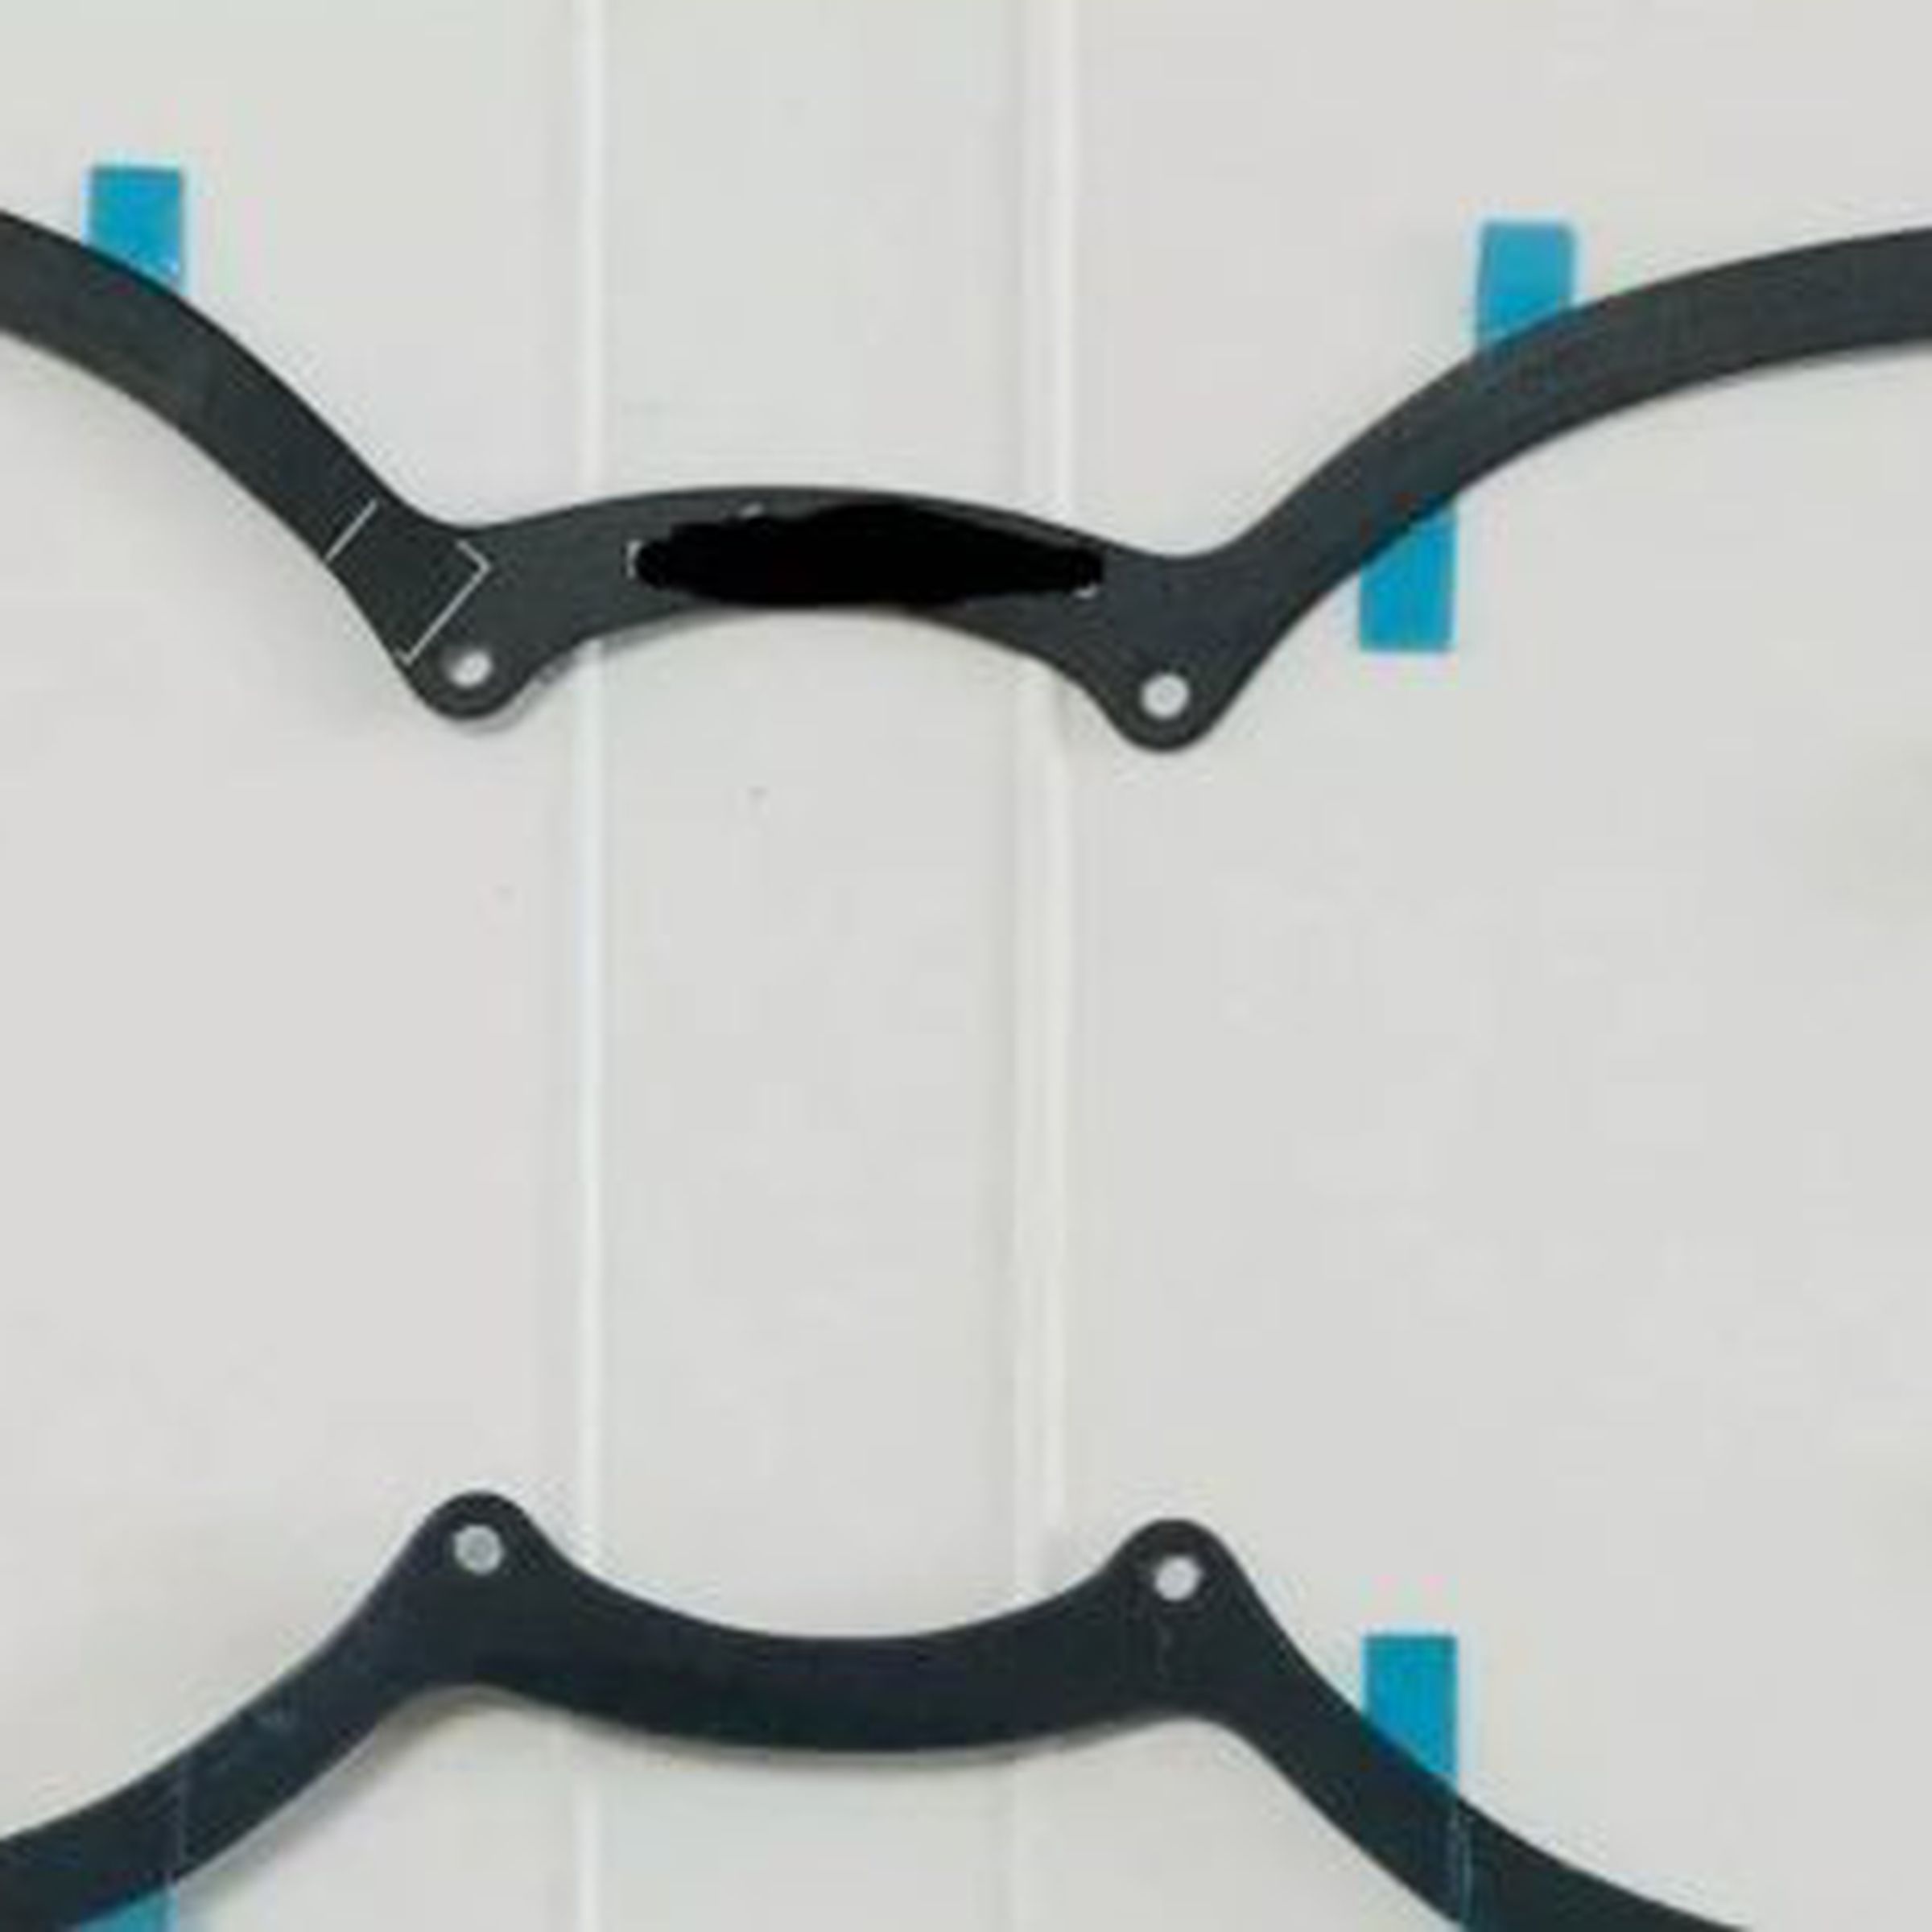 Photo of two ribbon cables that look like a pair of glasses.